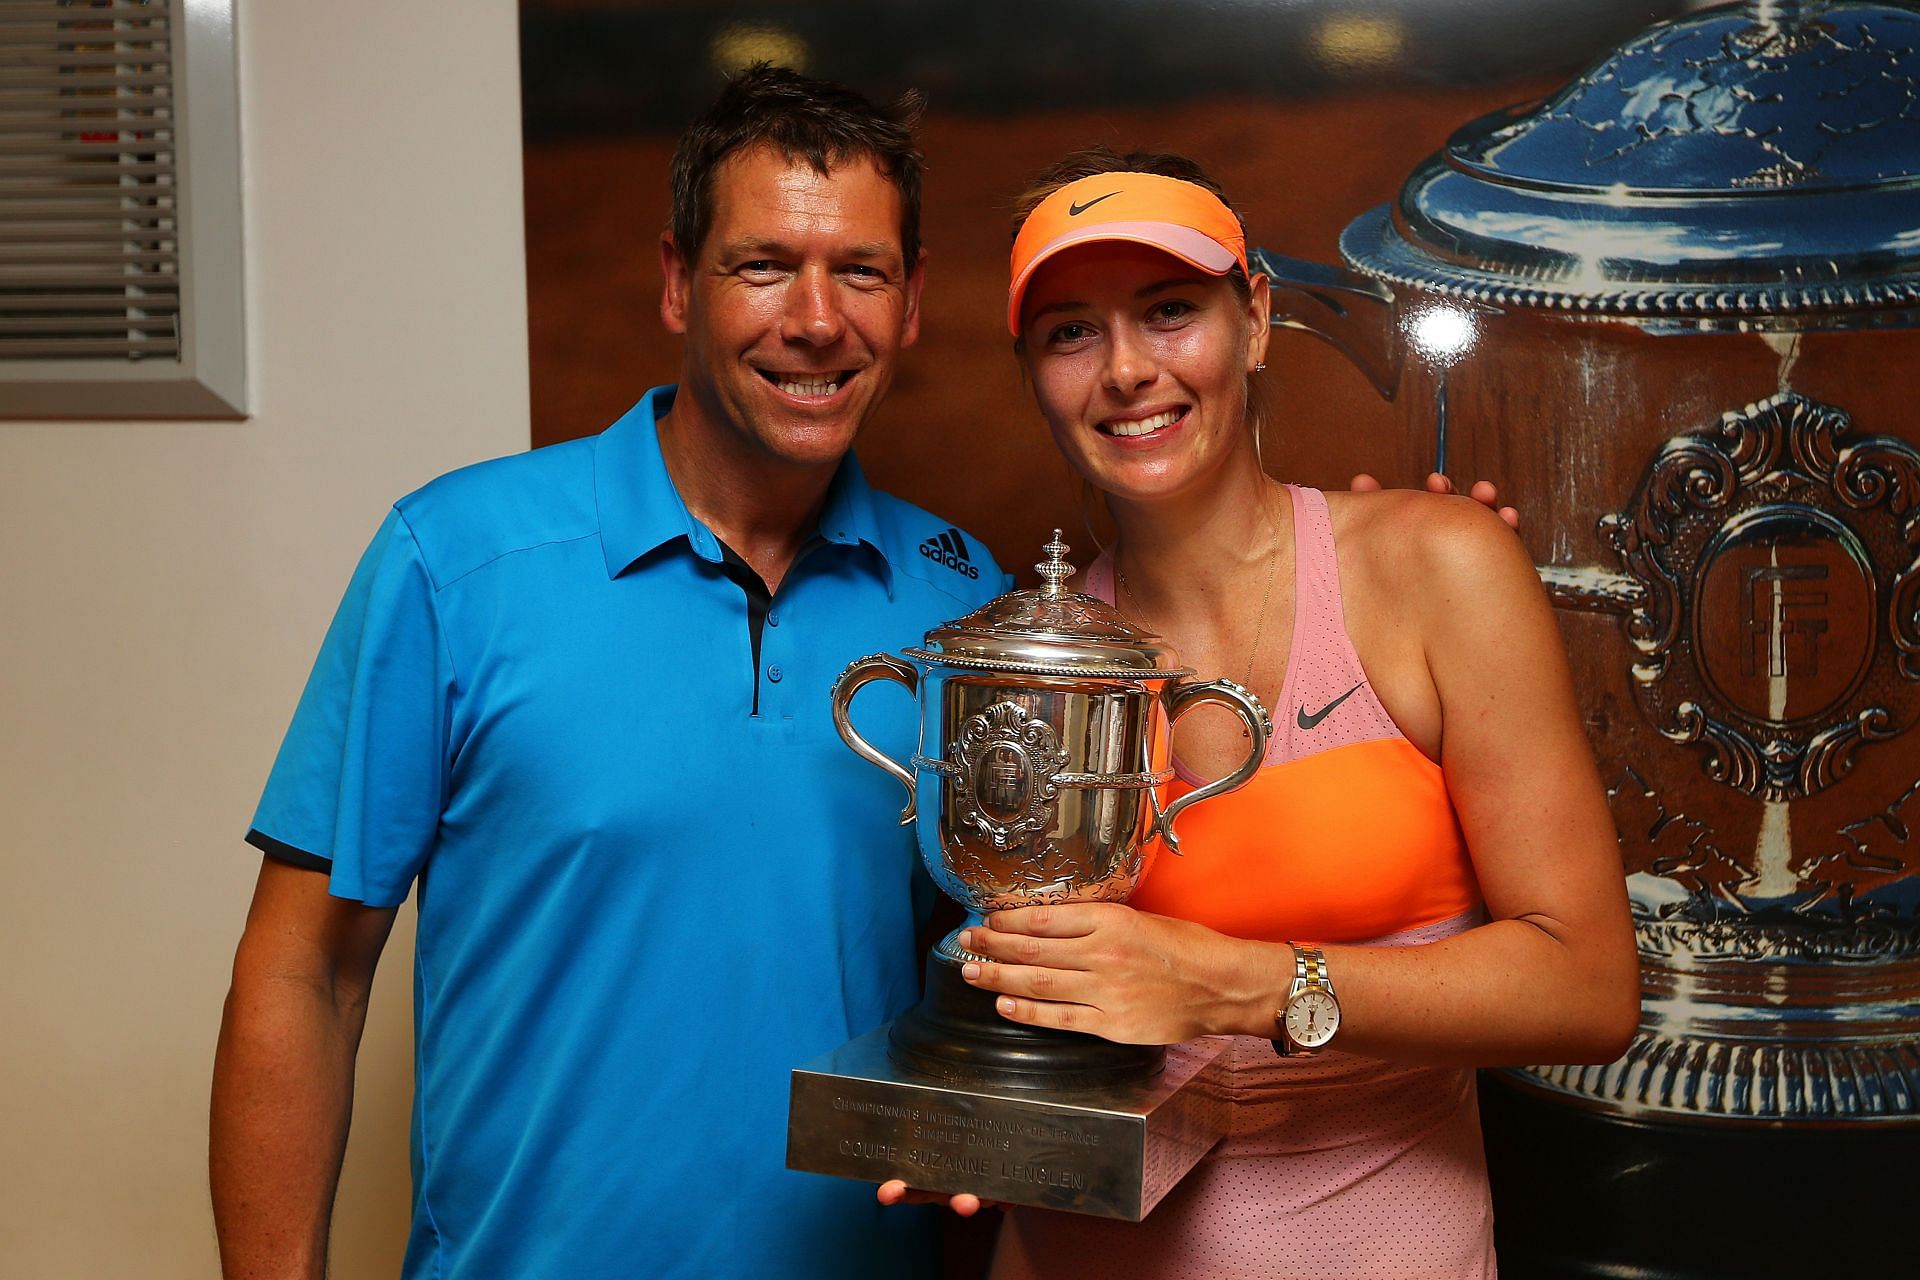 Sharapova with her coach after winning the 2014 French Open title